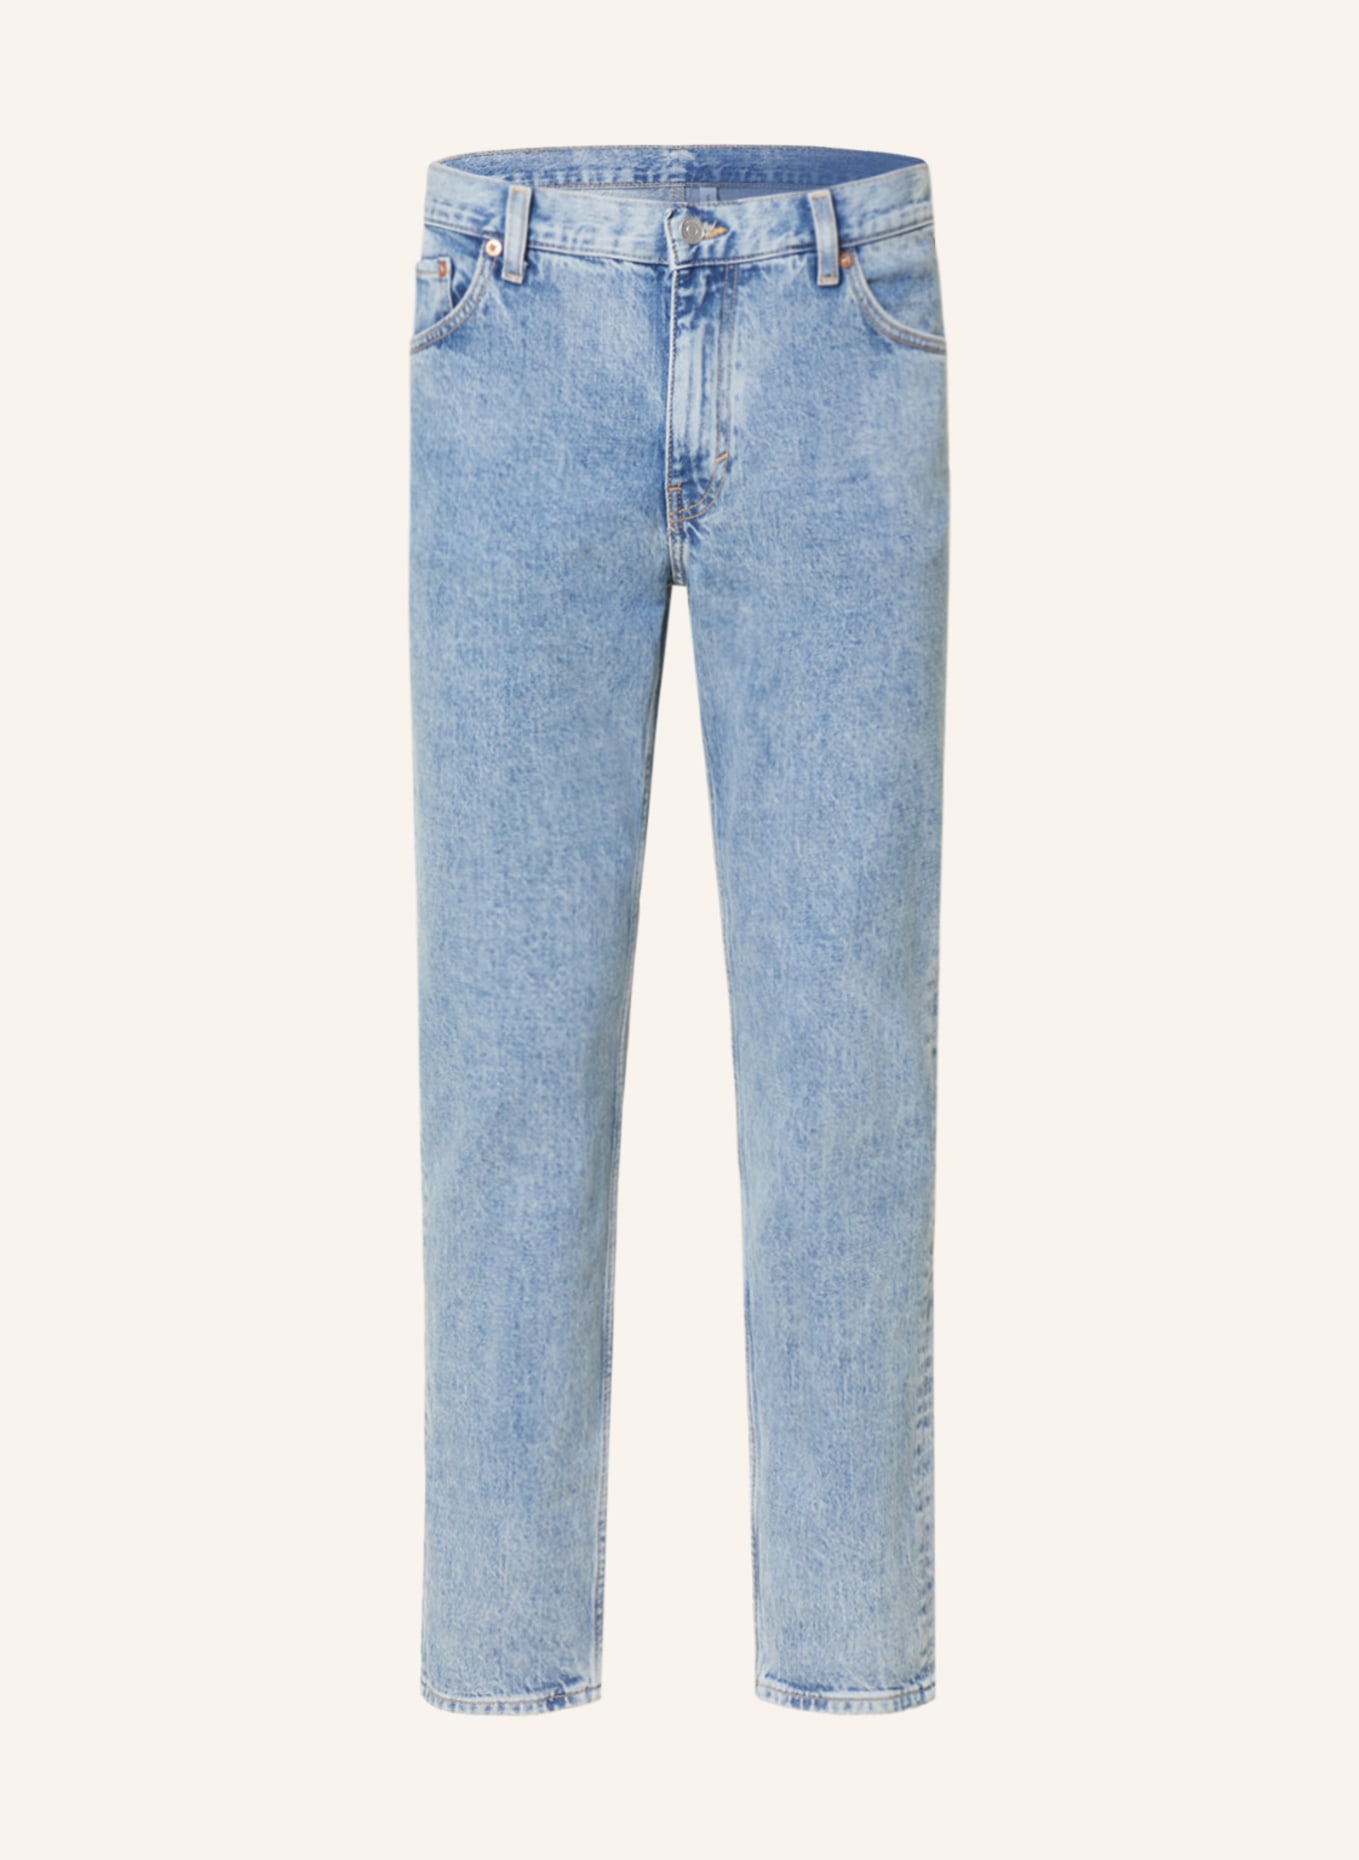 WEEKDAY Jeans SUNDAY Slim Tapered Fit, Farbe: 74-101 Cerulean blue (Bild 1)